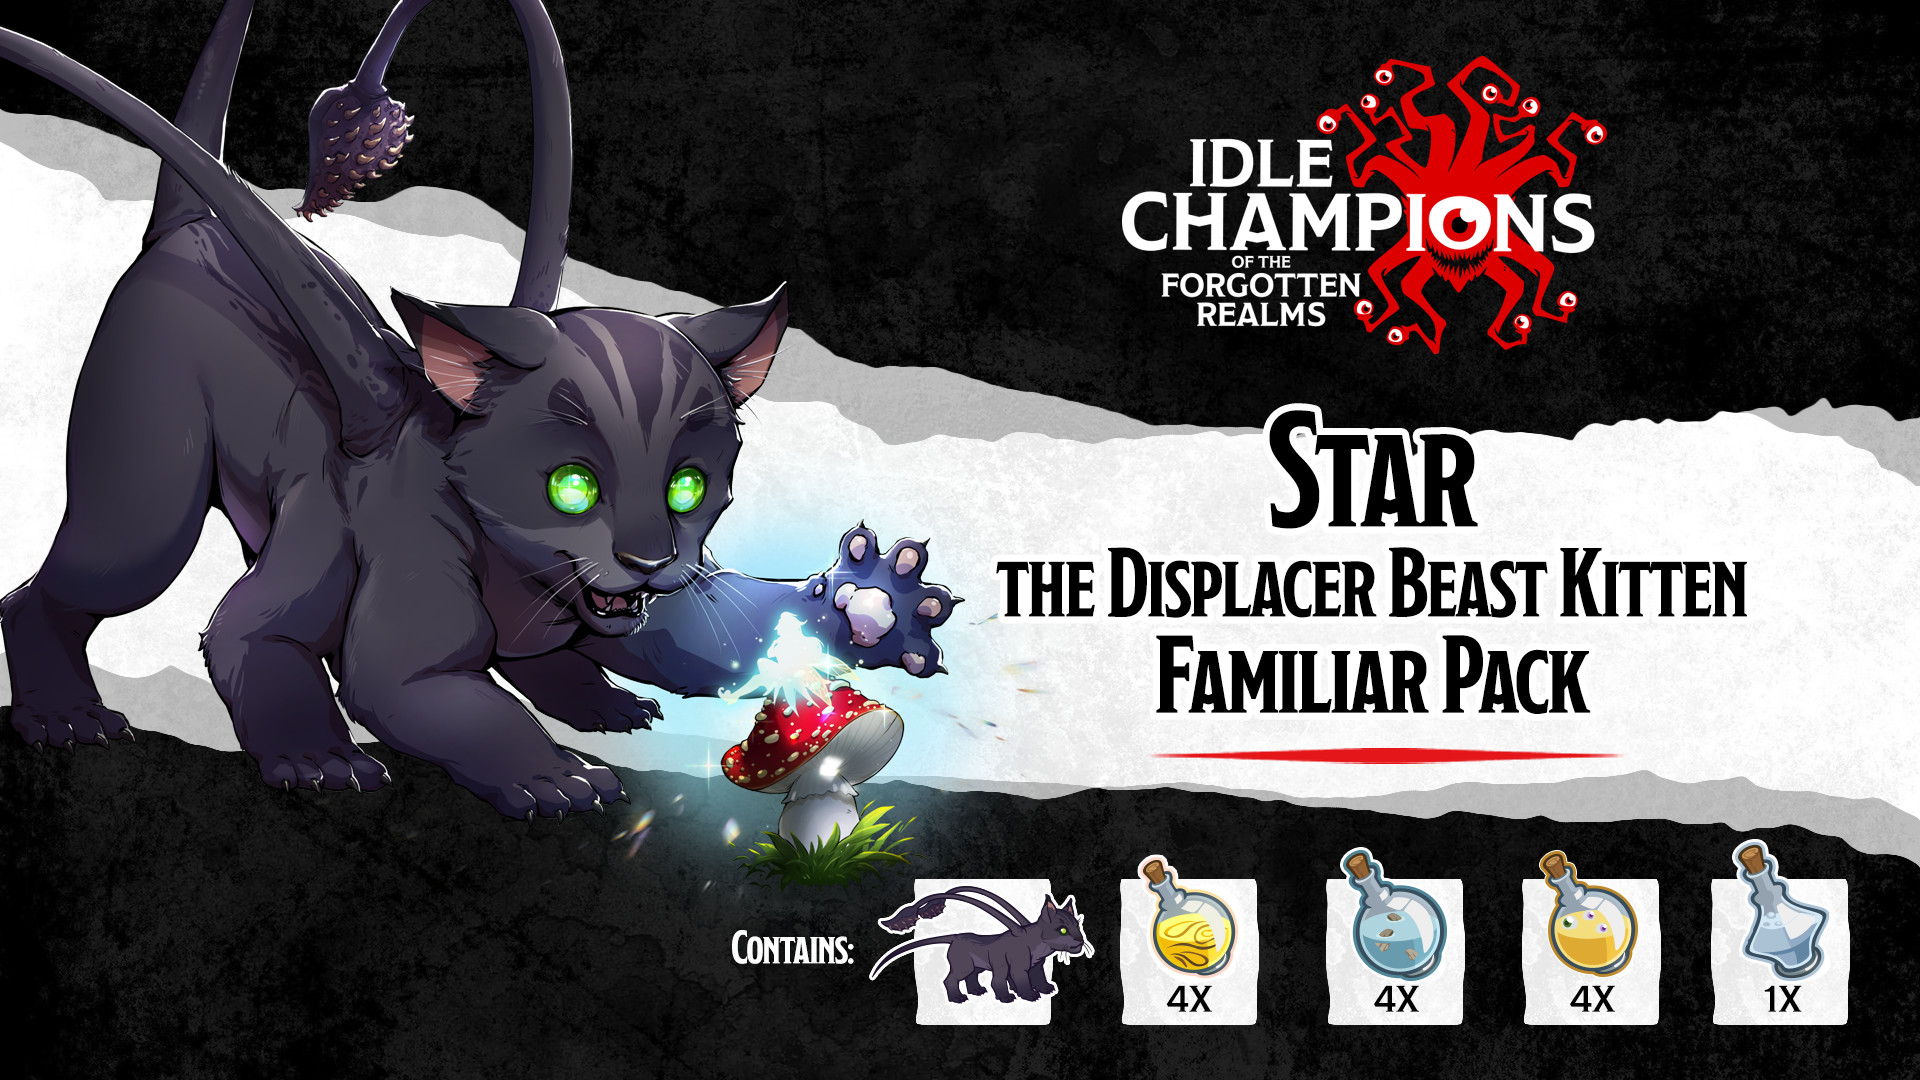 Idle Champions - Star the Displacer Beast Kitten Familiar Pack Featured Screenshot #1